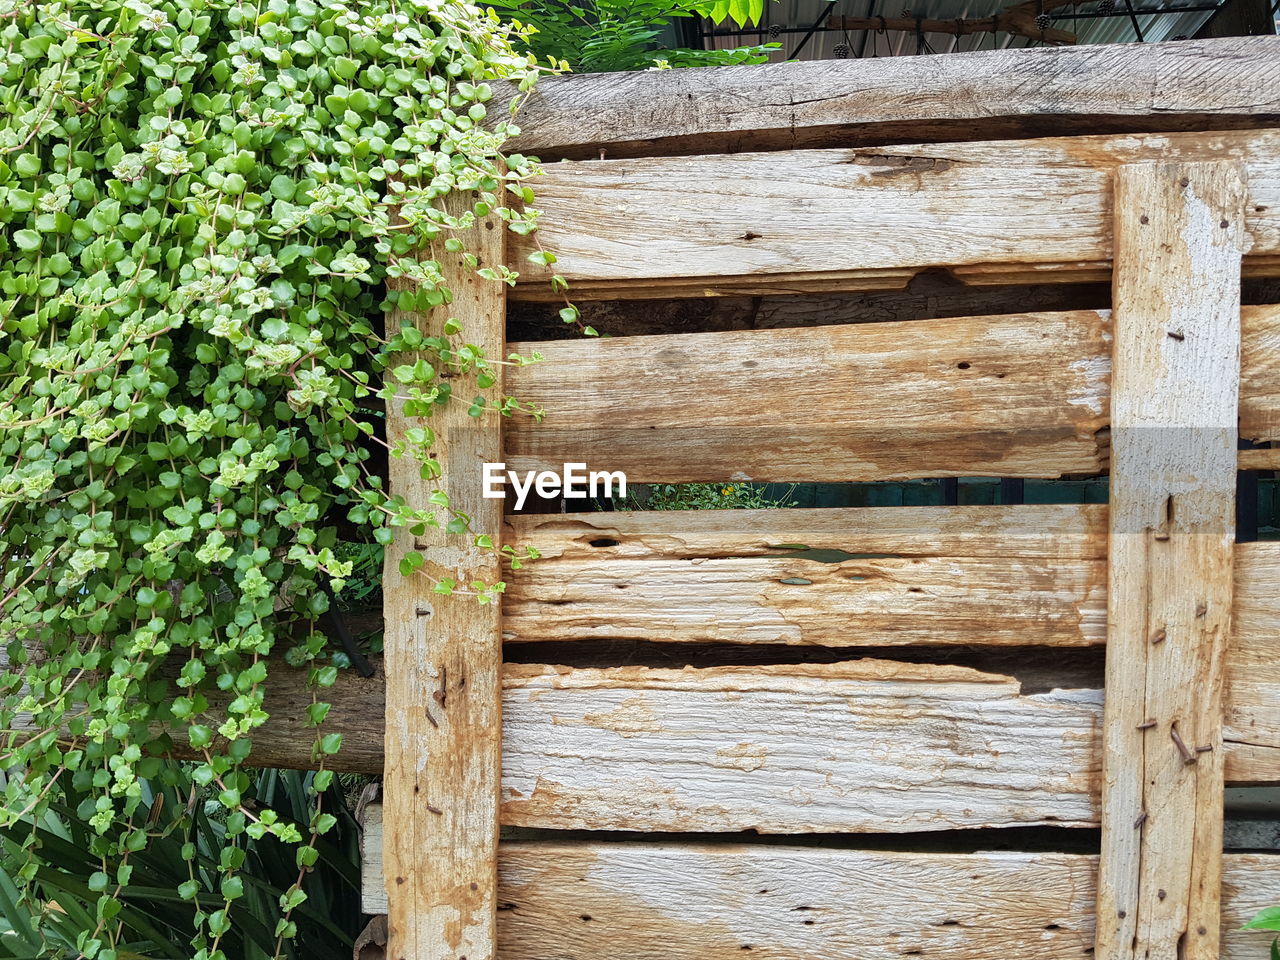 CLOSE-UP OF WOODEN FENCE WITH PLANTS